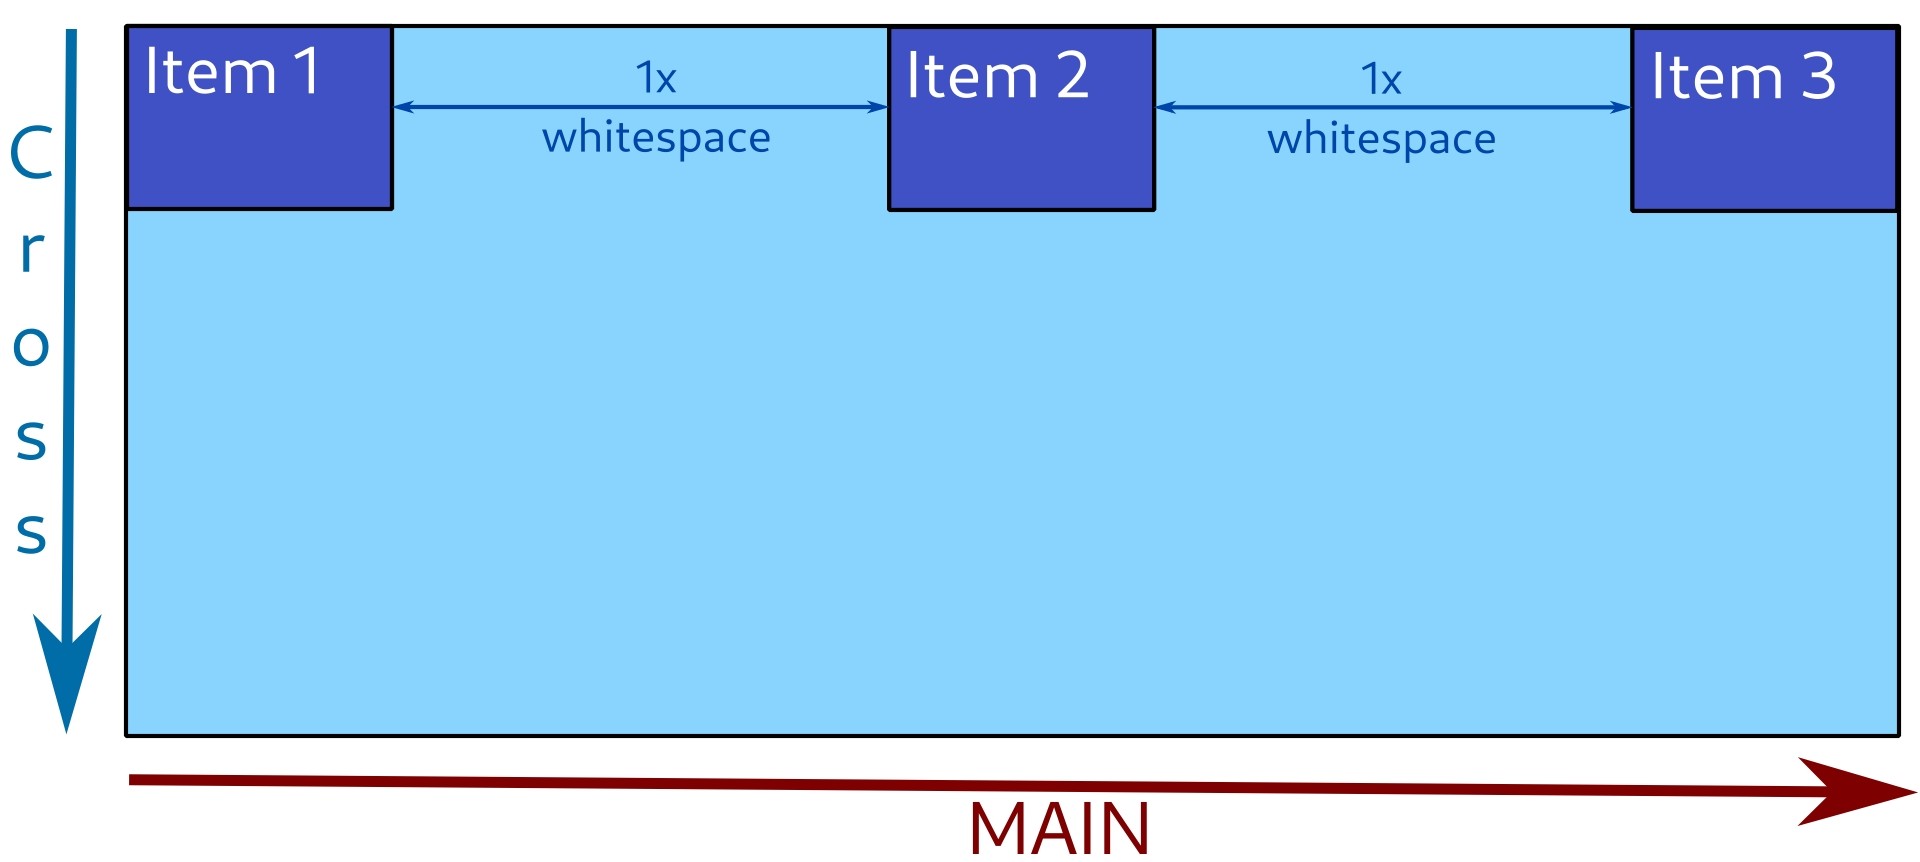 Items are distributed along main axis, with same amount of whitespace between them.